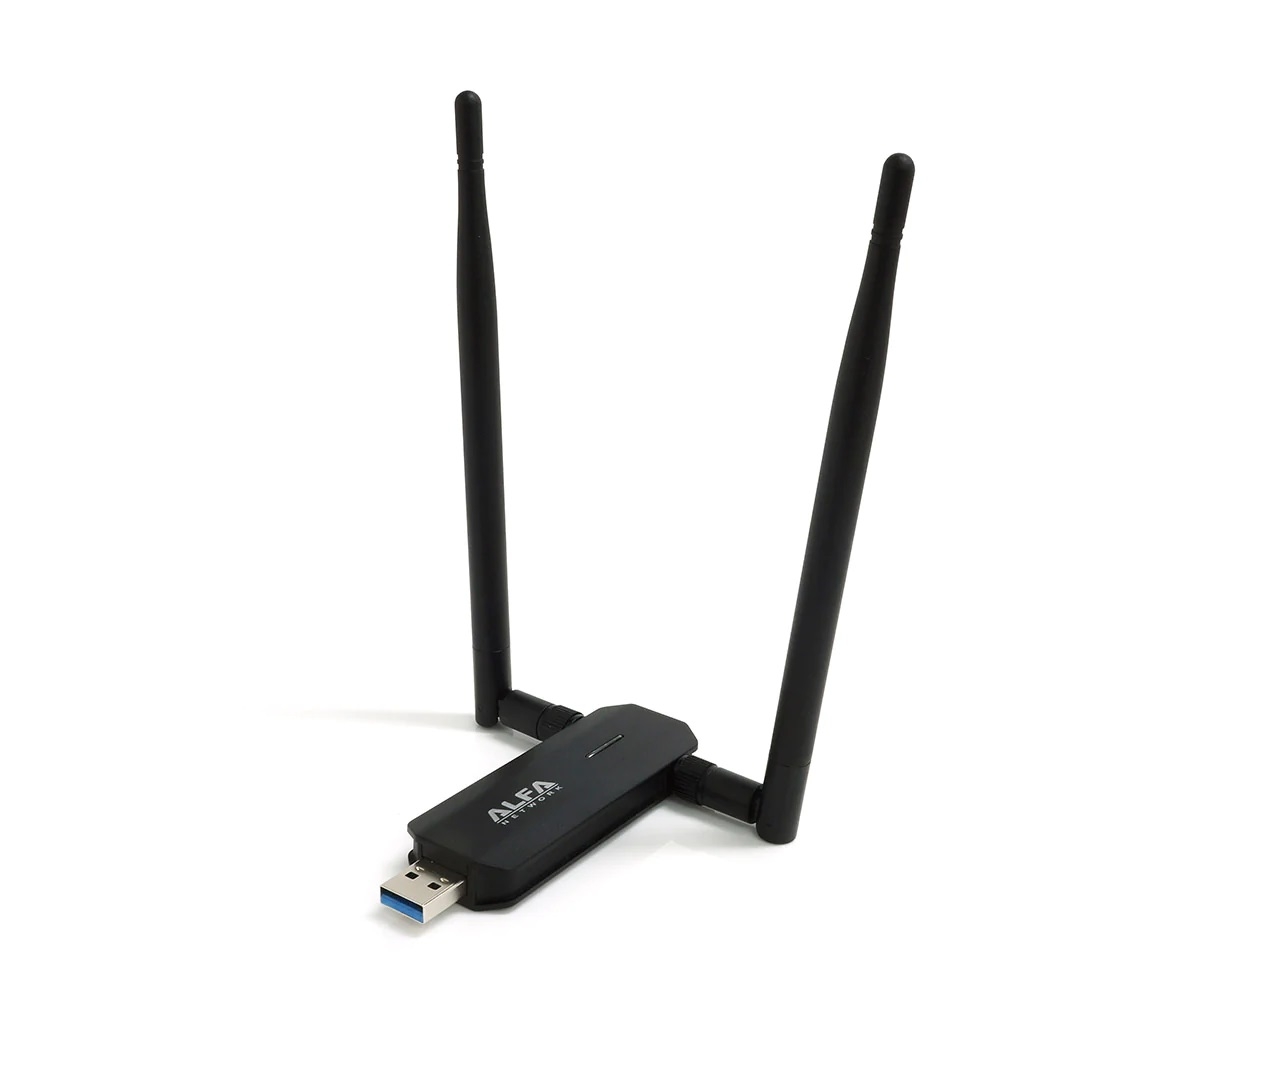 Hylde Forøge veteran ALFA NETWORK 802.11ax AC1800 High-Speed USB 3.2 Dual Band WiFi adapter  (AWUS036AX) - The source for WiFi products at best prices in Europe - wifi -stock.com